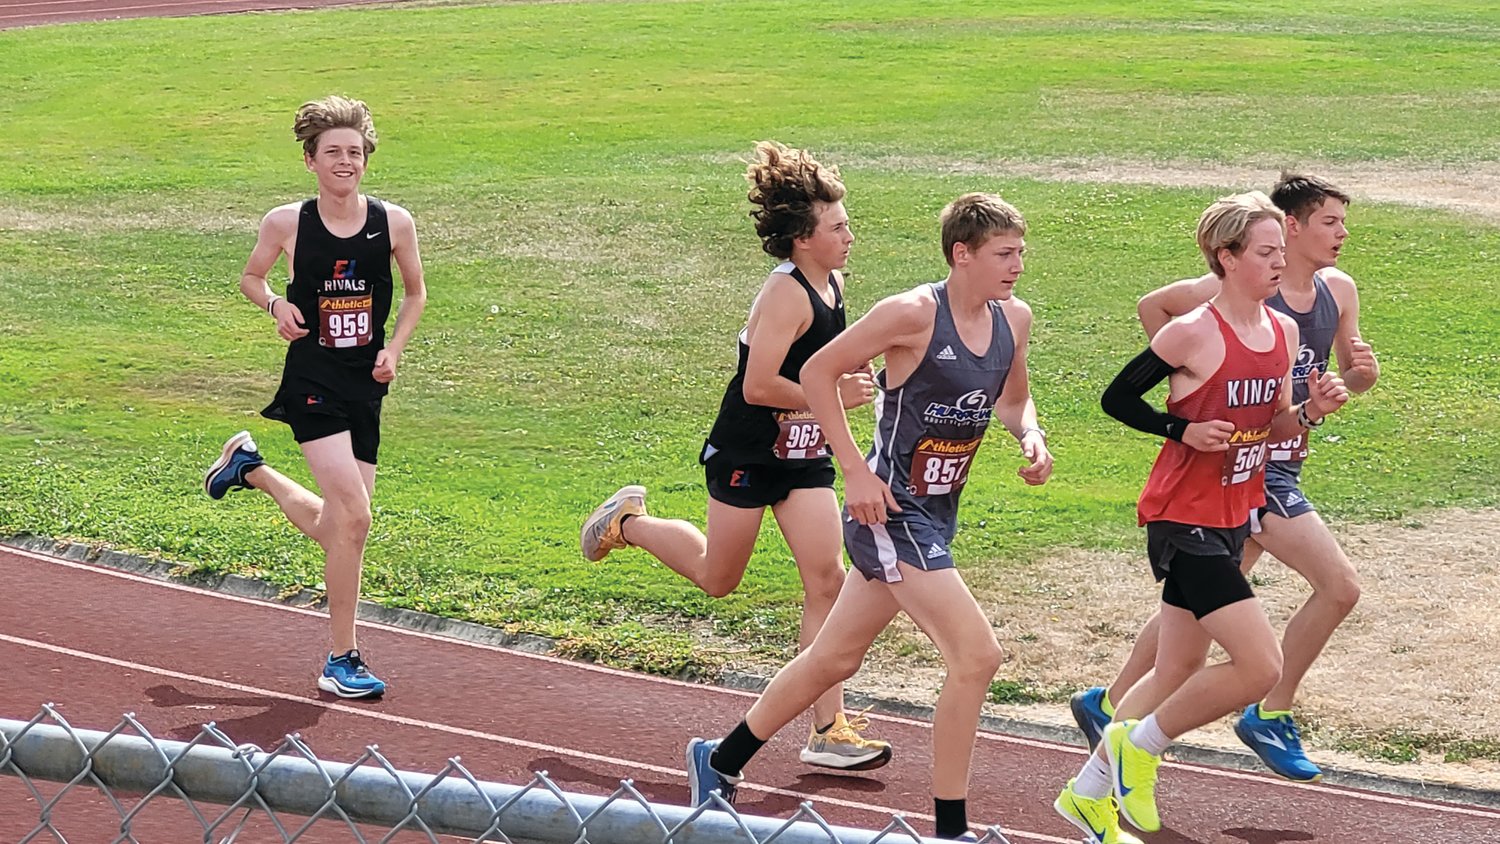 Indigo Gould (left) and Grady White (middle-left) round the corner during Saturday’s South Whidbey Carl Westling Invite on Whidbey Island.